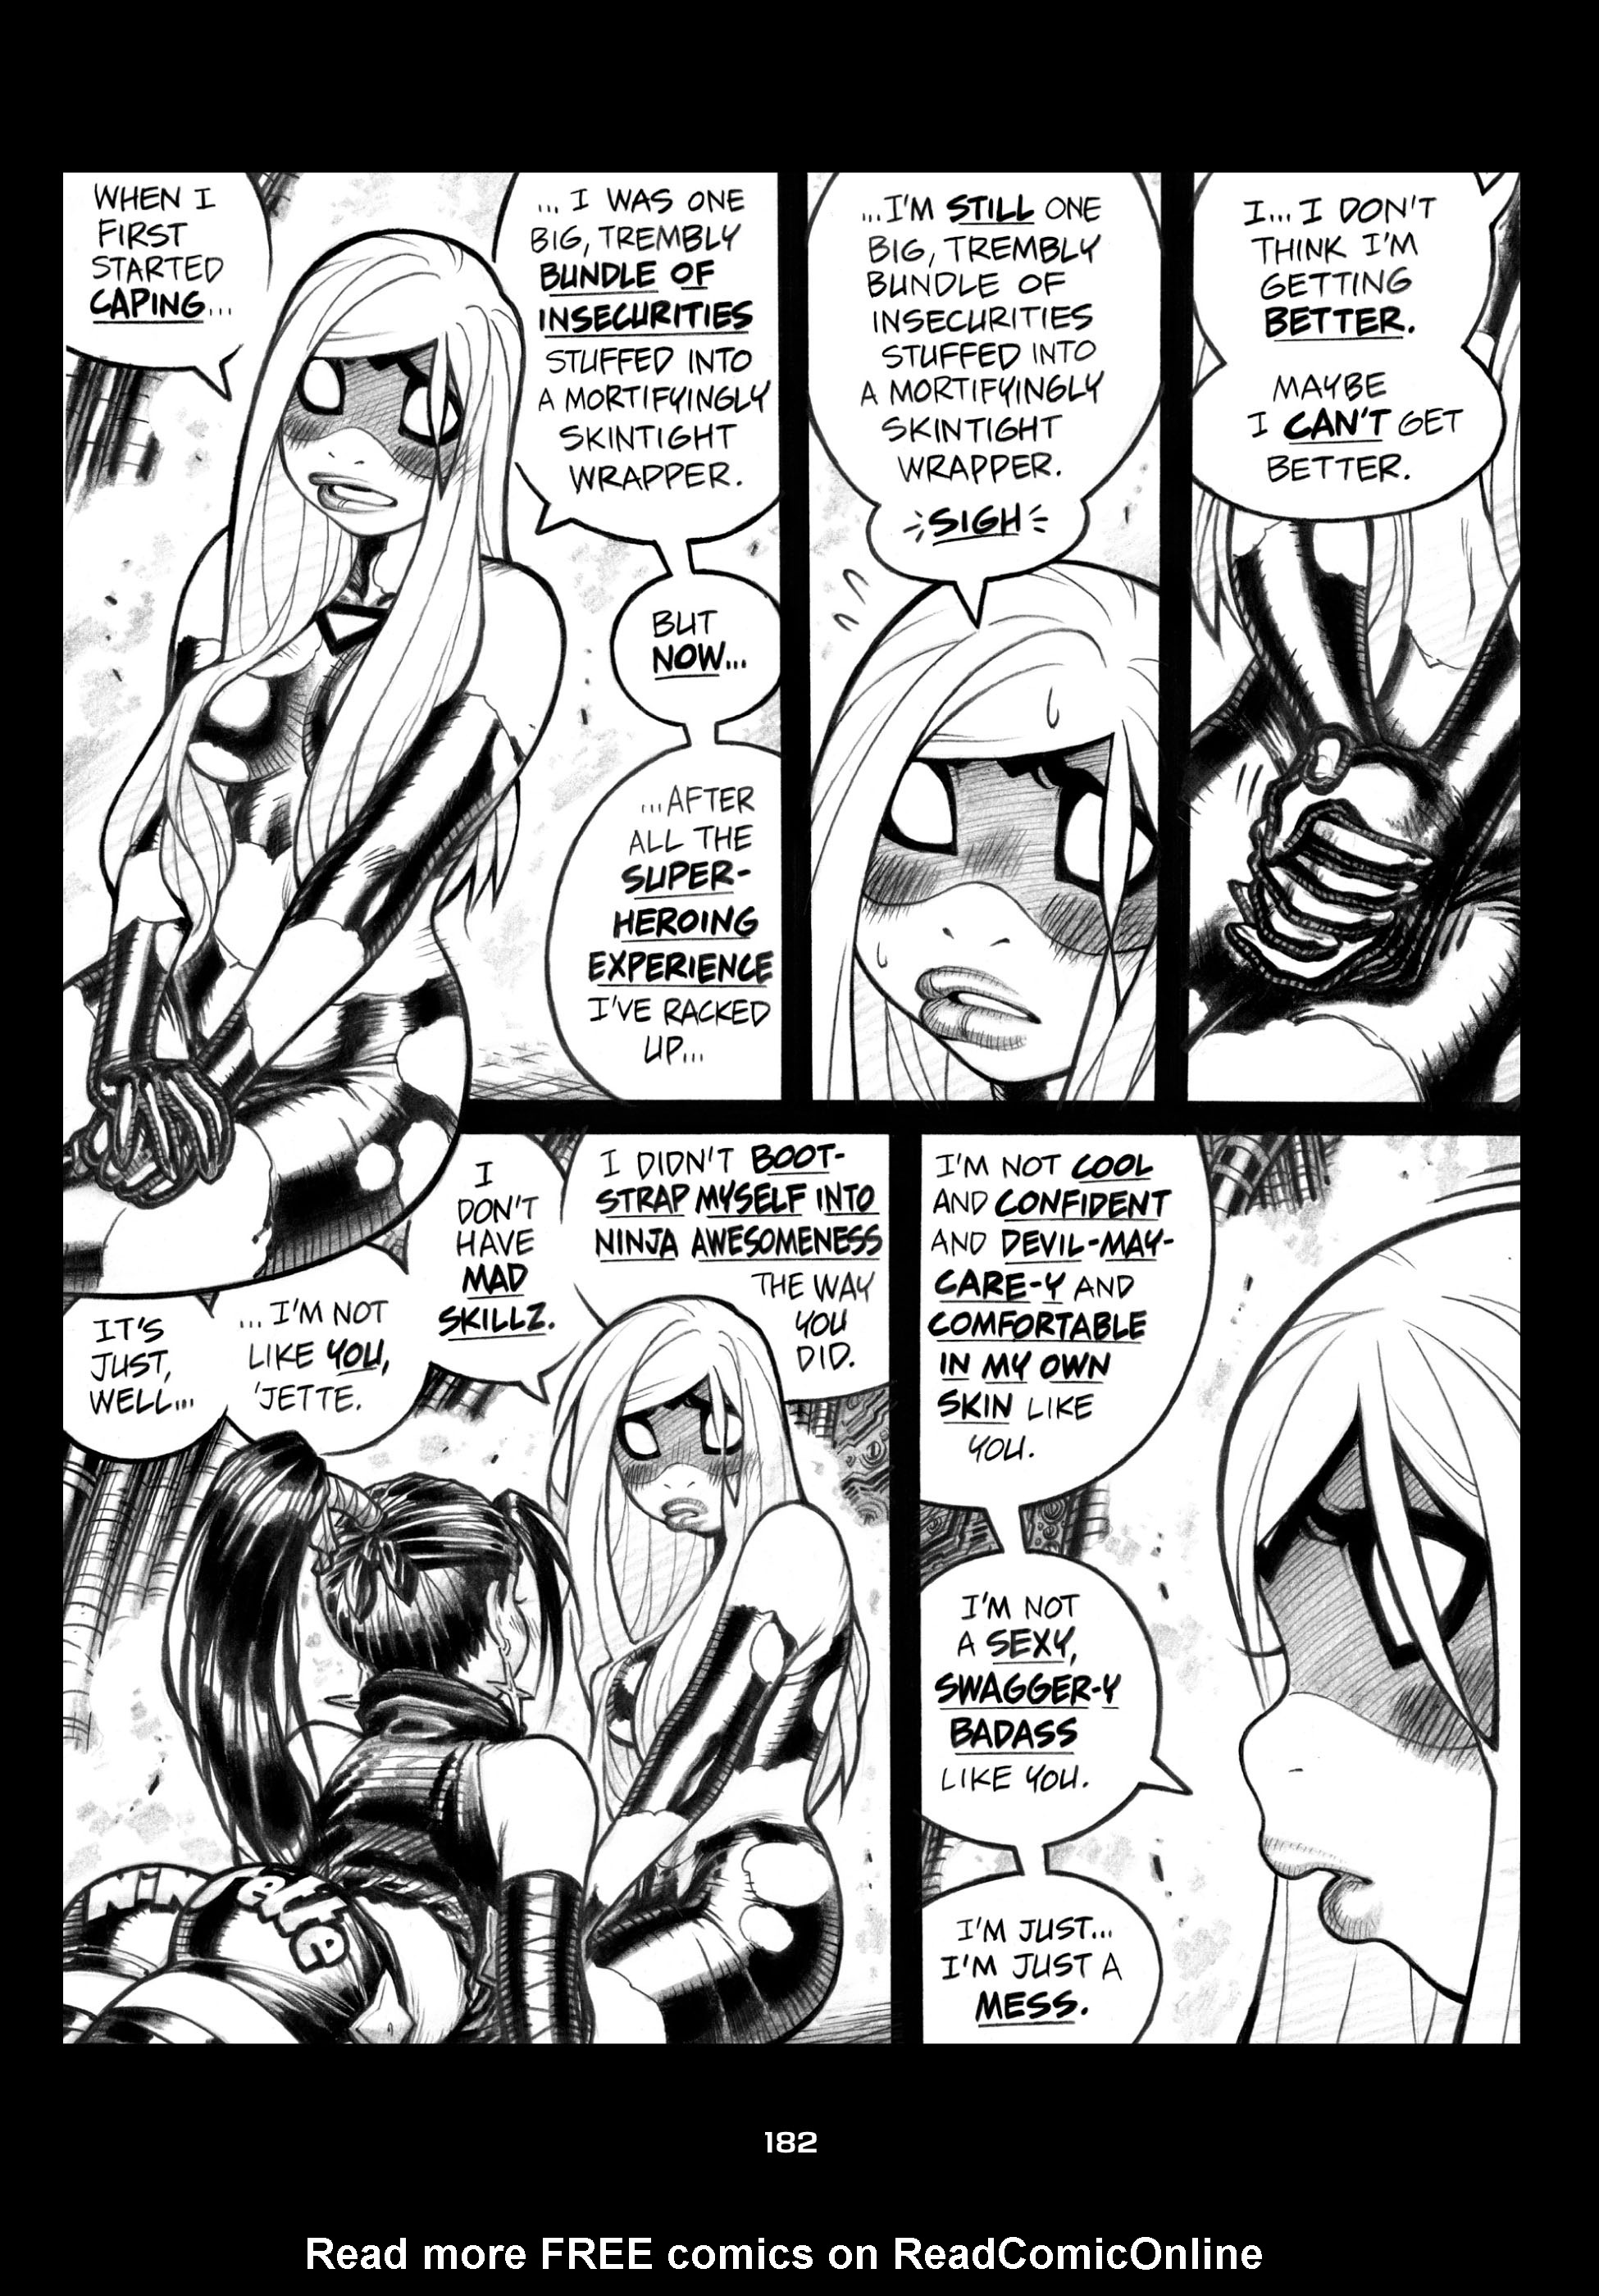 Read online Empowered comic -  Issue #7 - 182